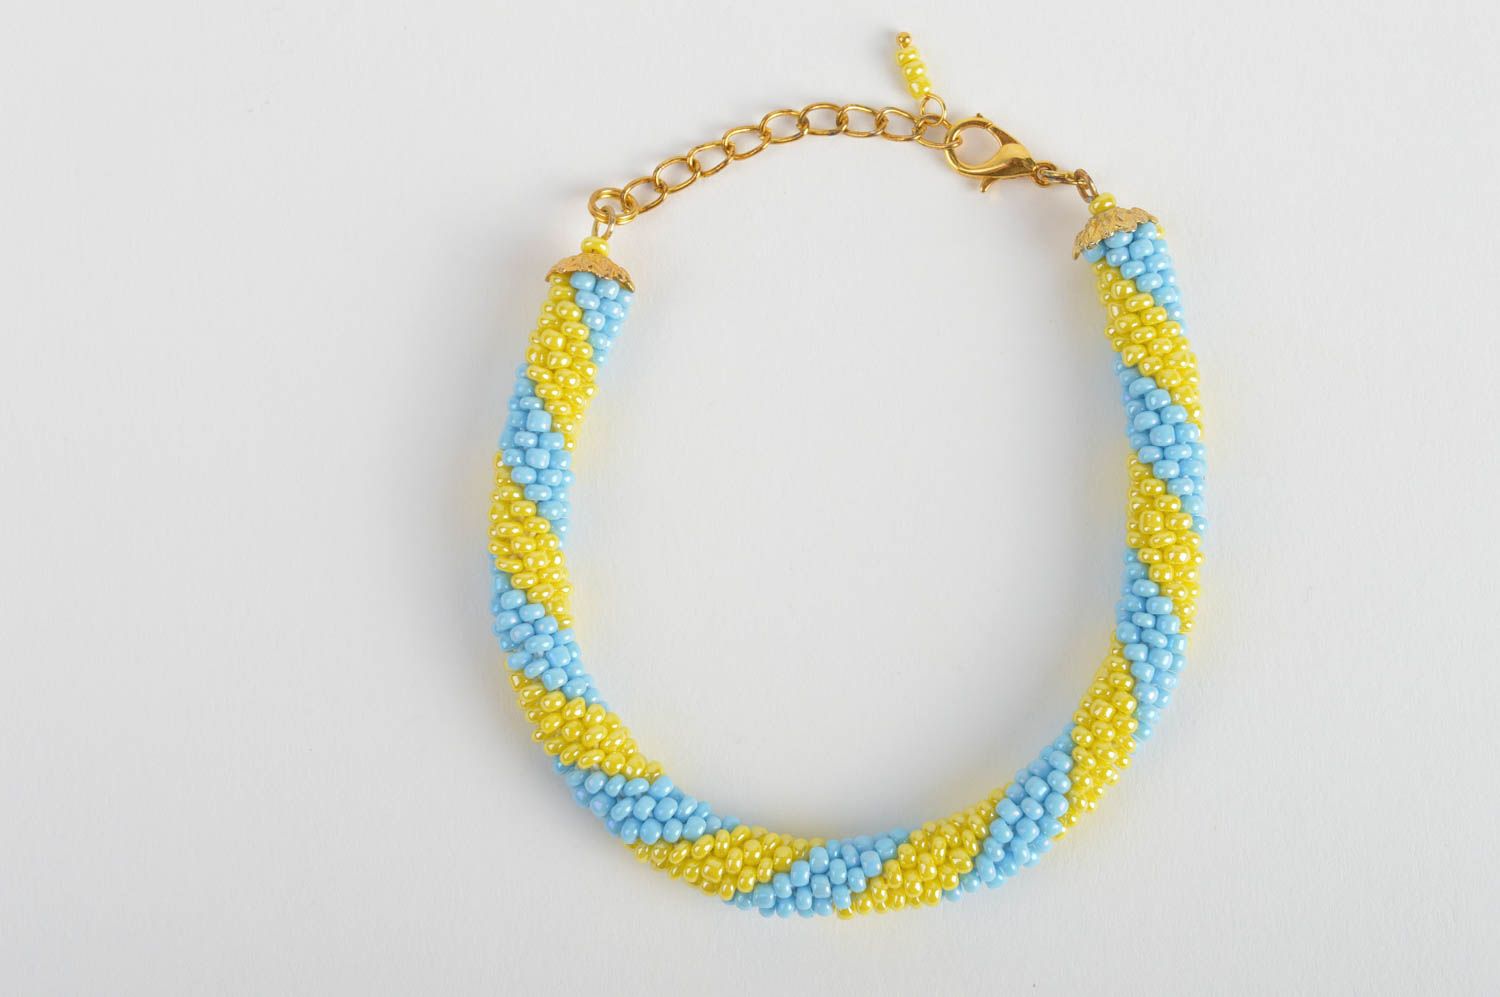 Handmade beaded cord wrist bracelet in blue and yellow colors for women photo 2